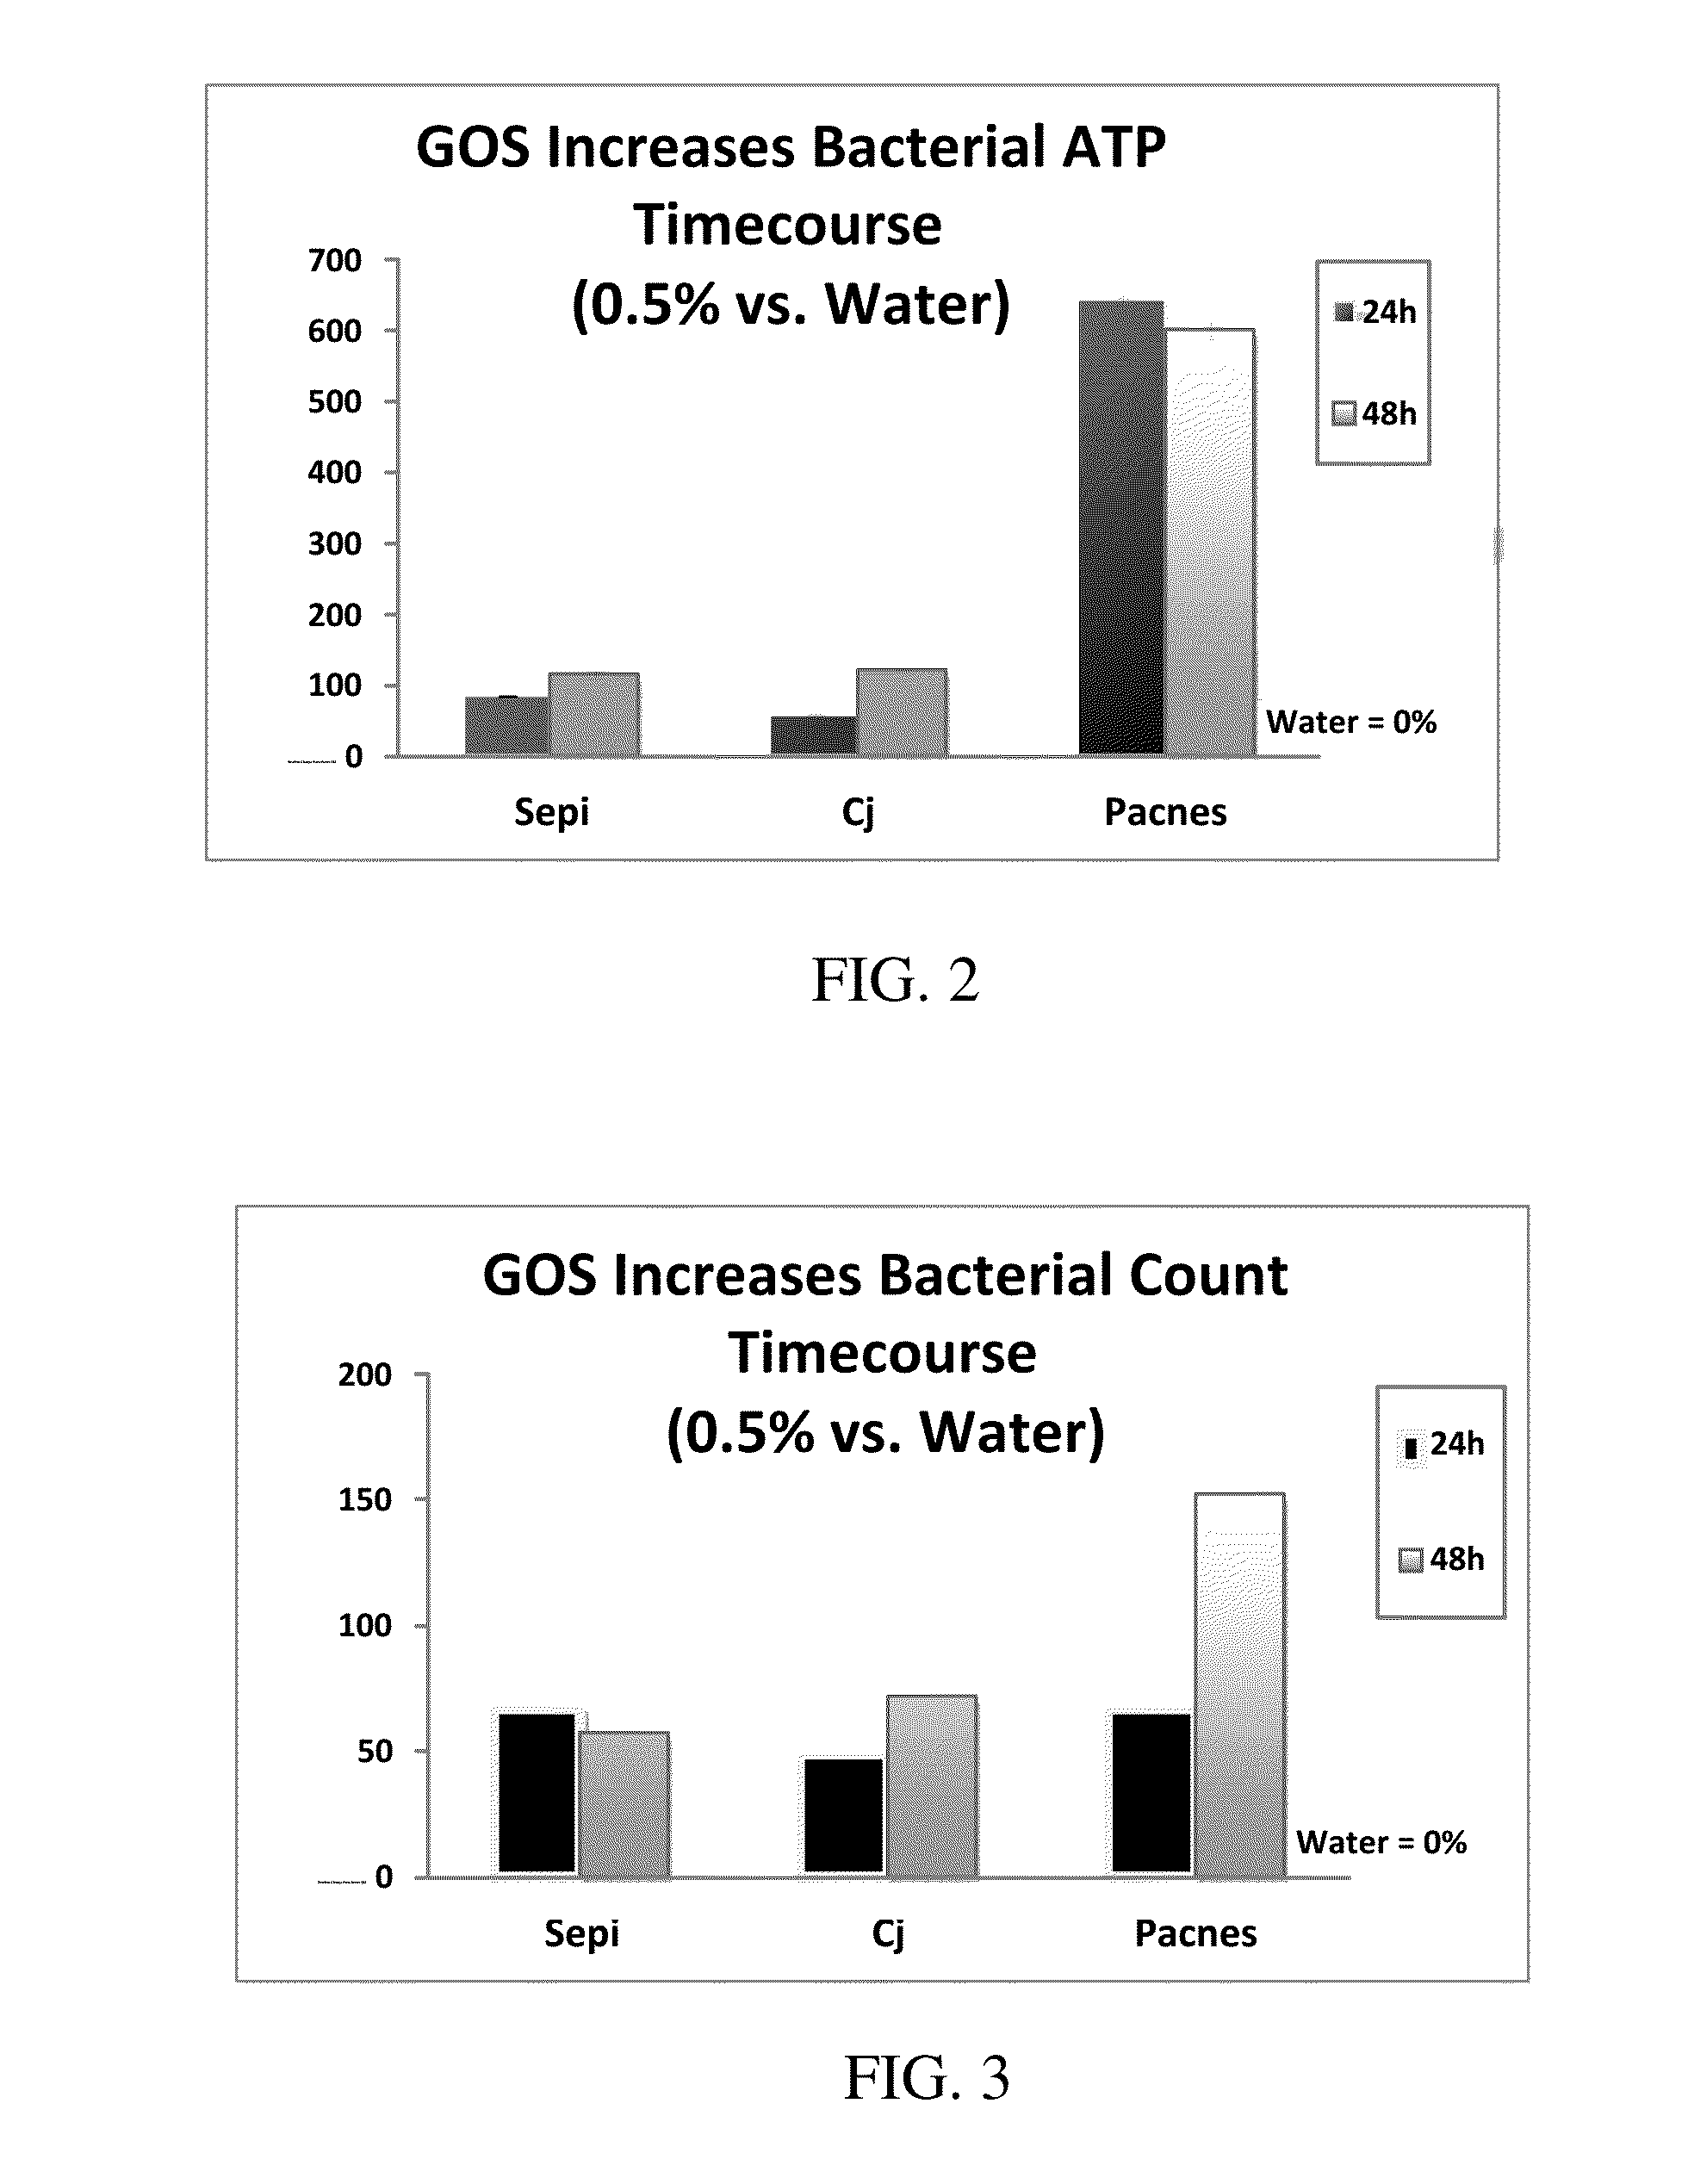 Topical use of a skin-commensal prebiotic agent and compositions containing the same